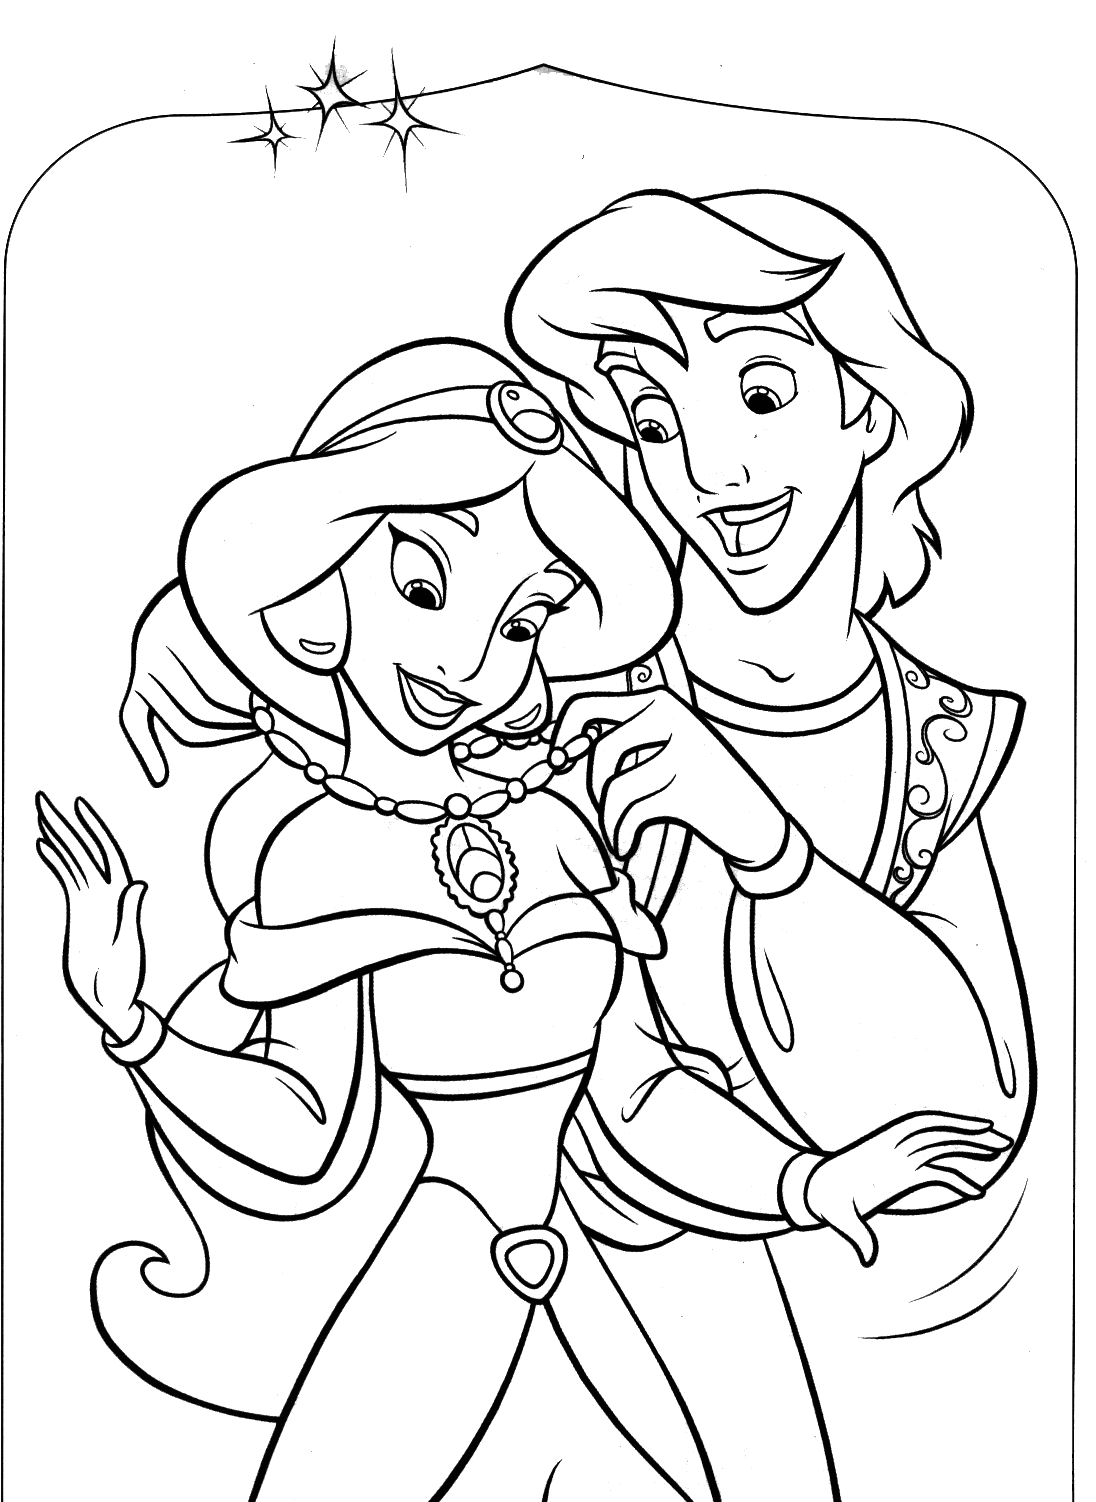 Aladdin coloring pages to download and print for free